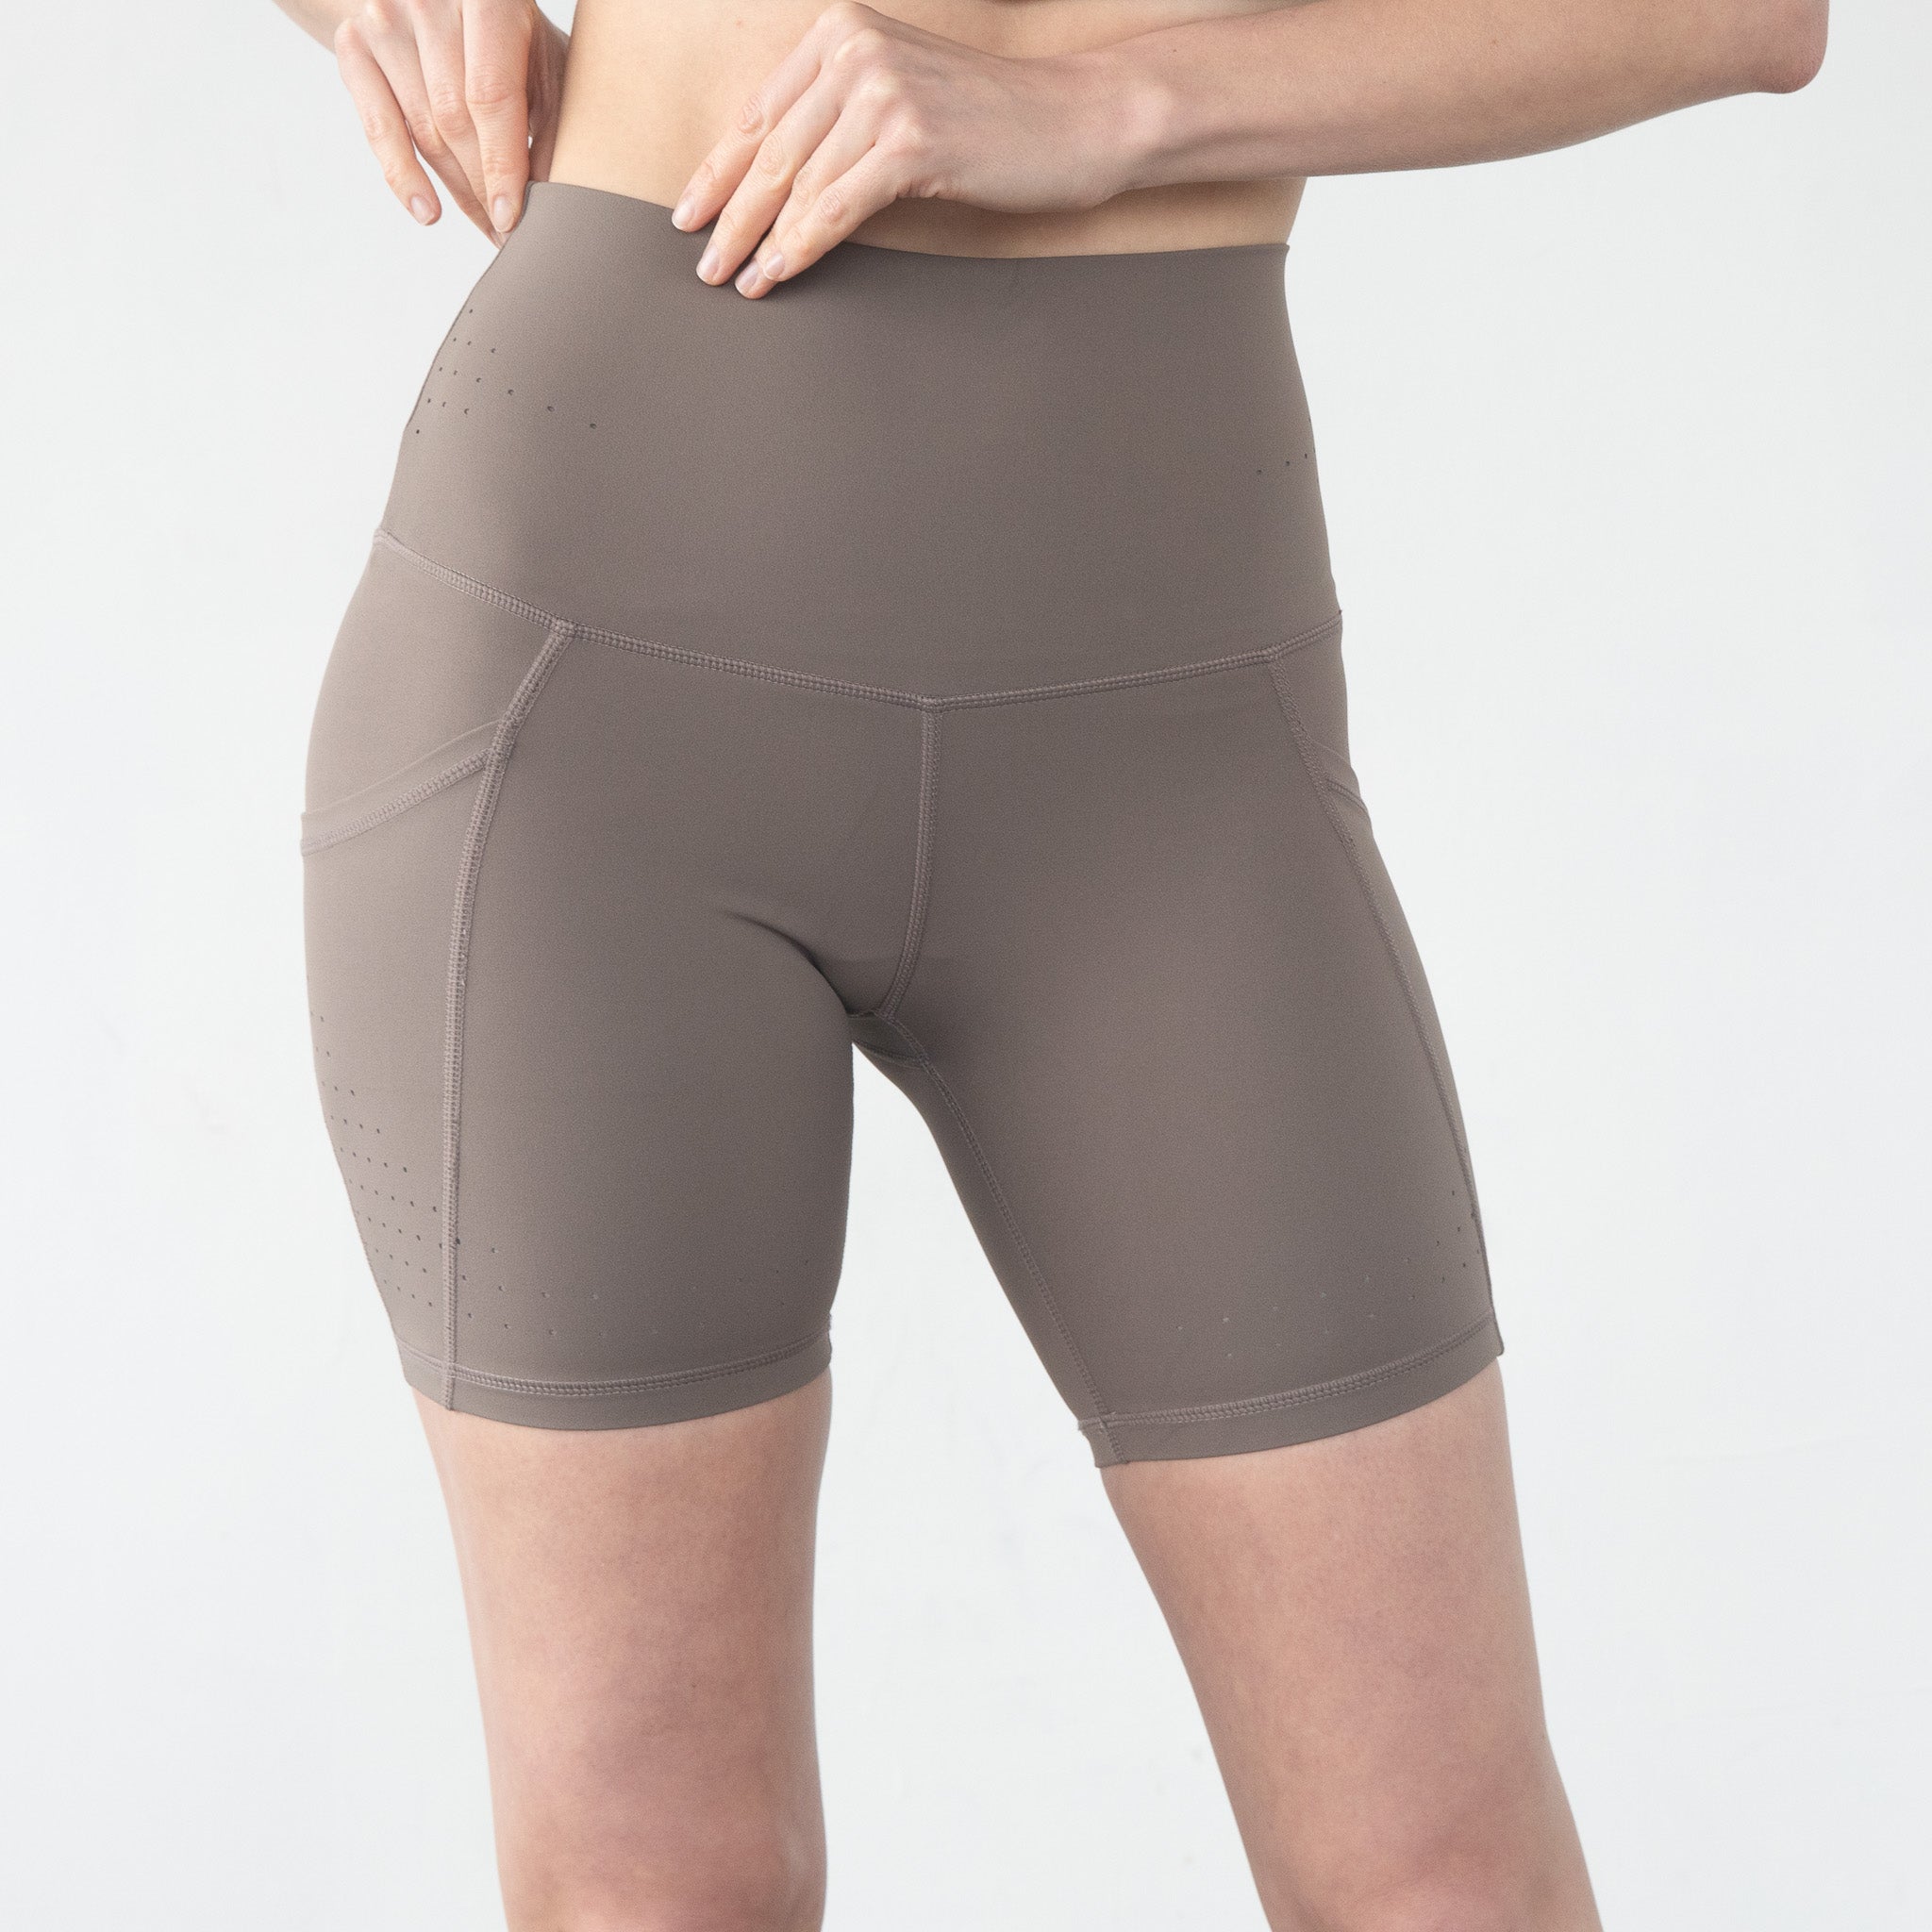 Best Postpartum Compression Shorts for Quick Recovery